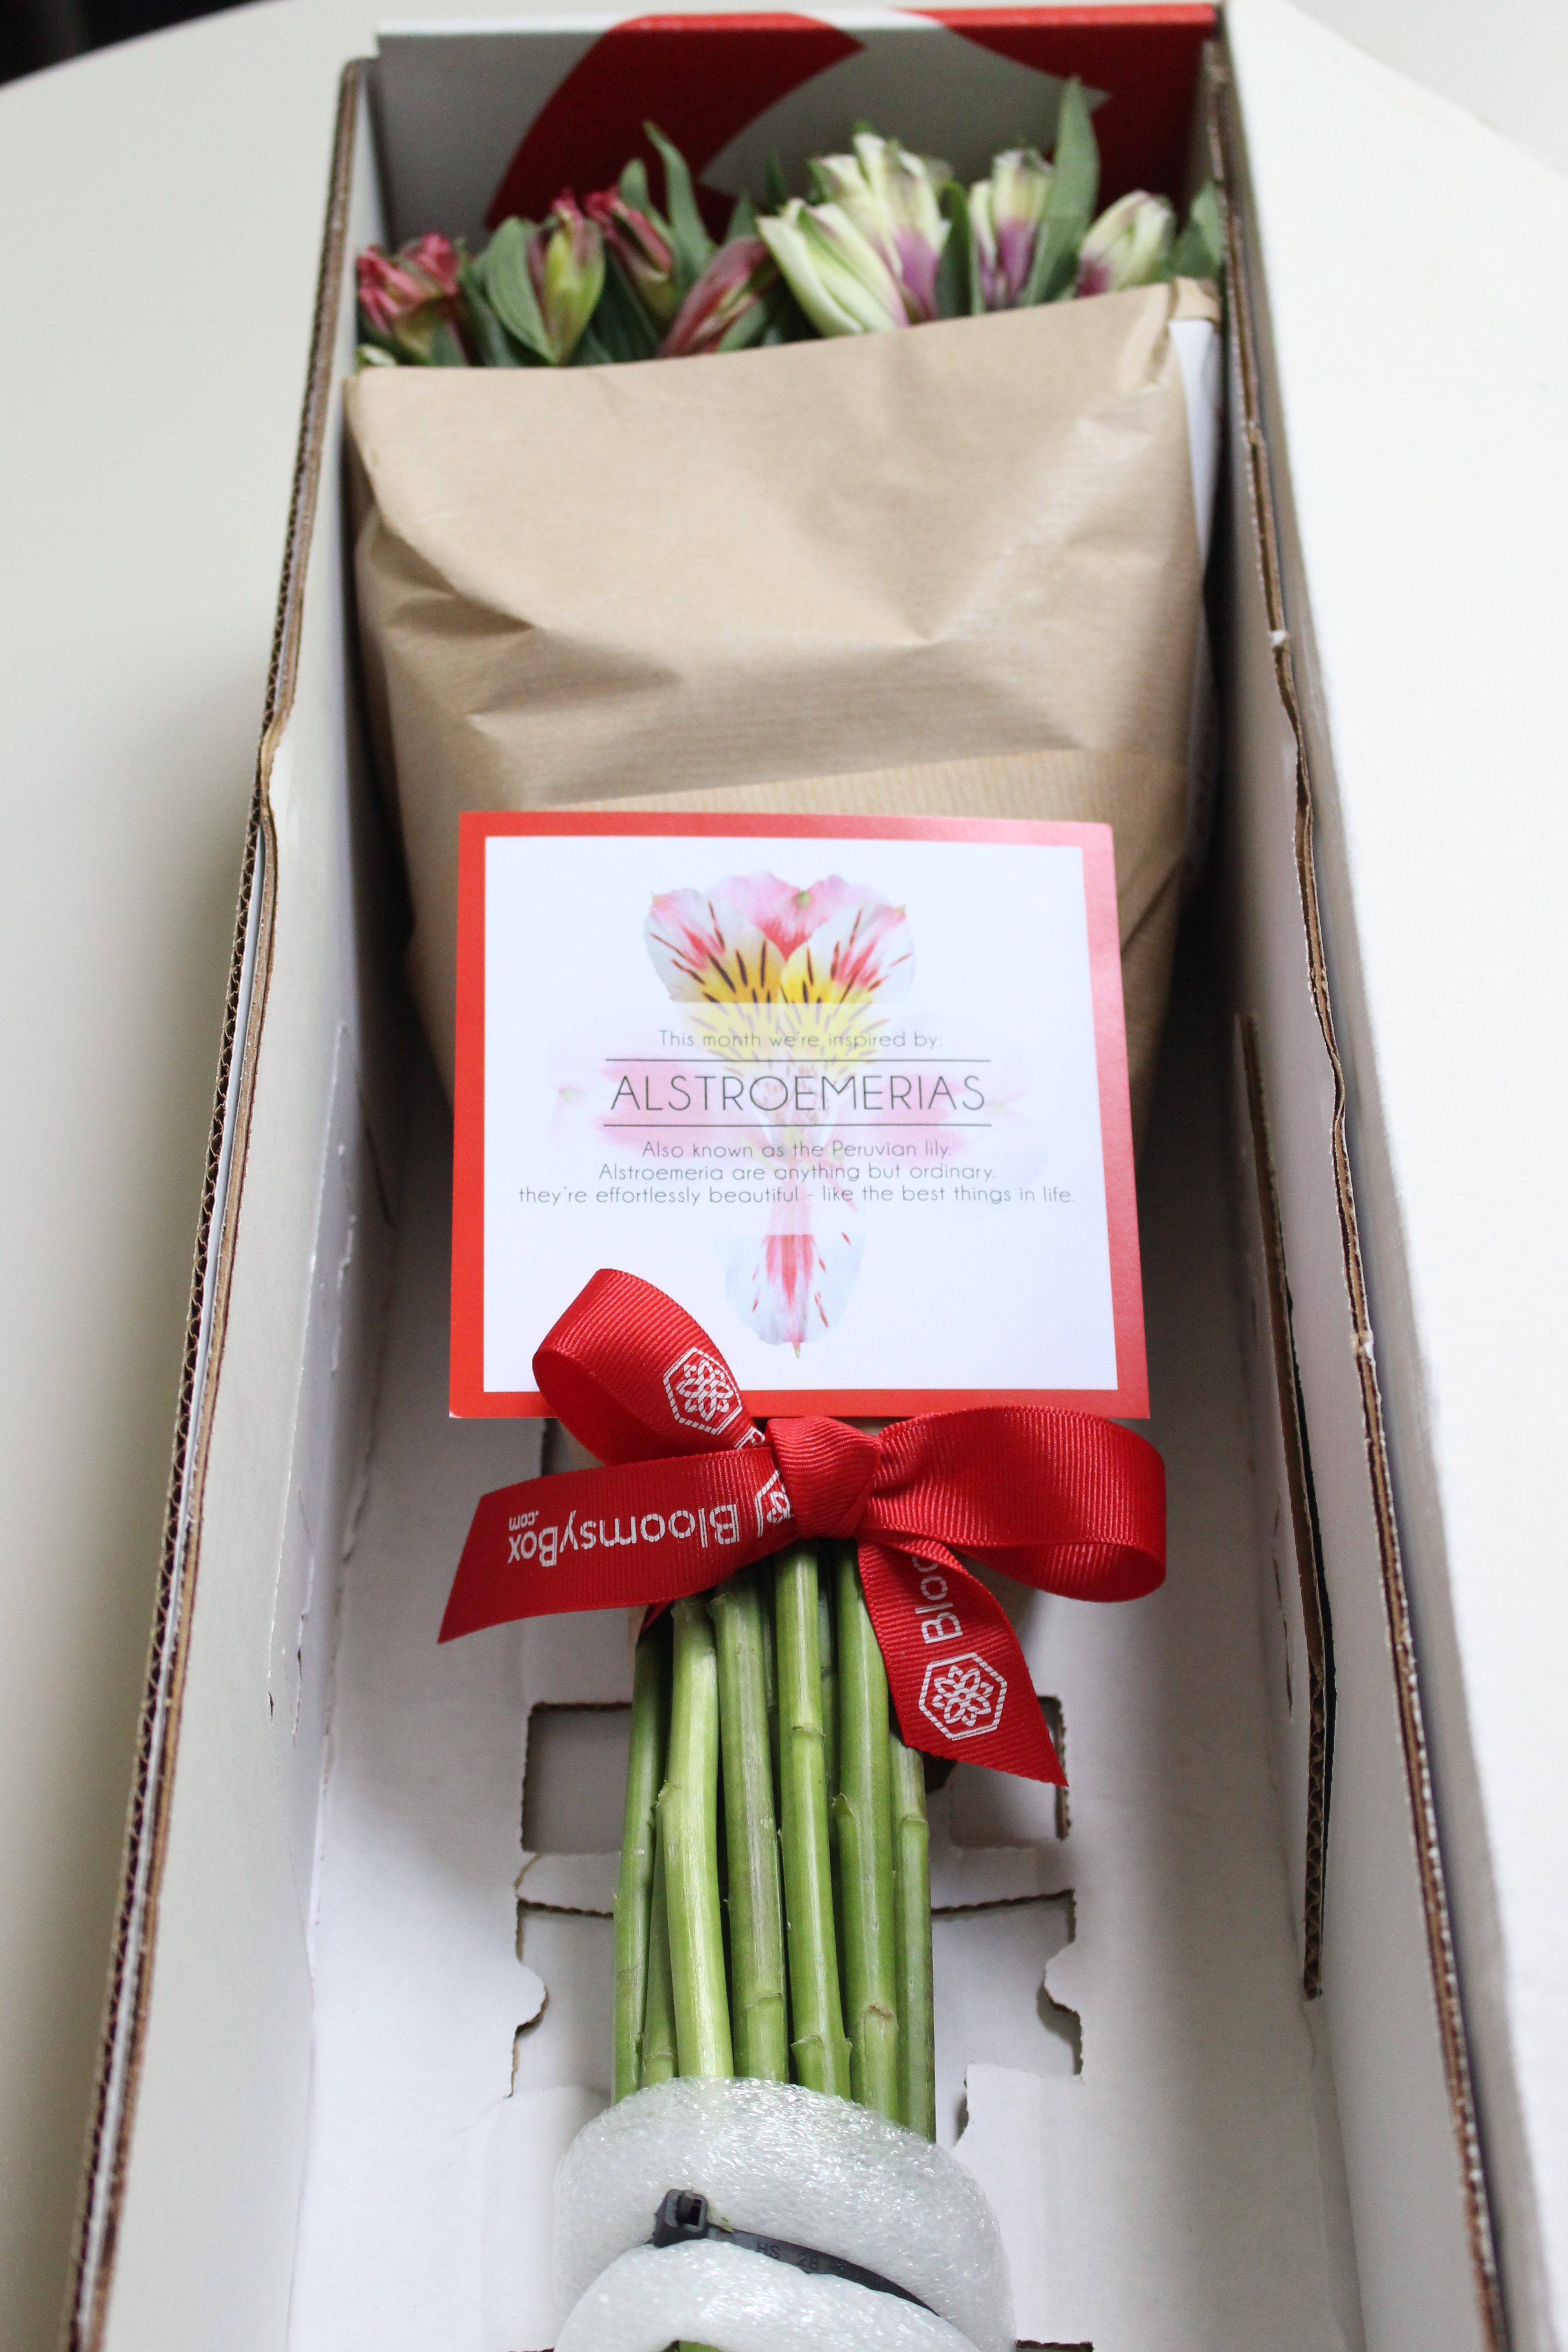 Bloomsy Box Subscription Box by www.whitecottagehomeandliving.com